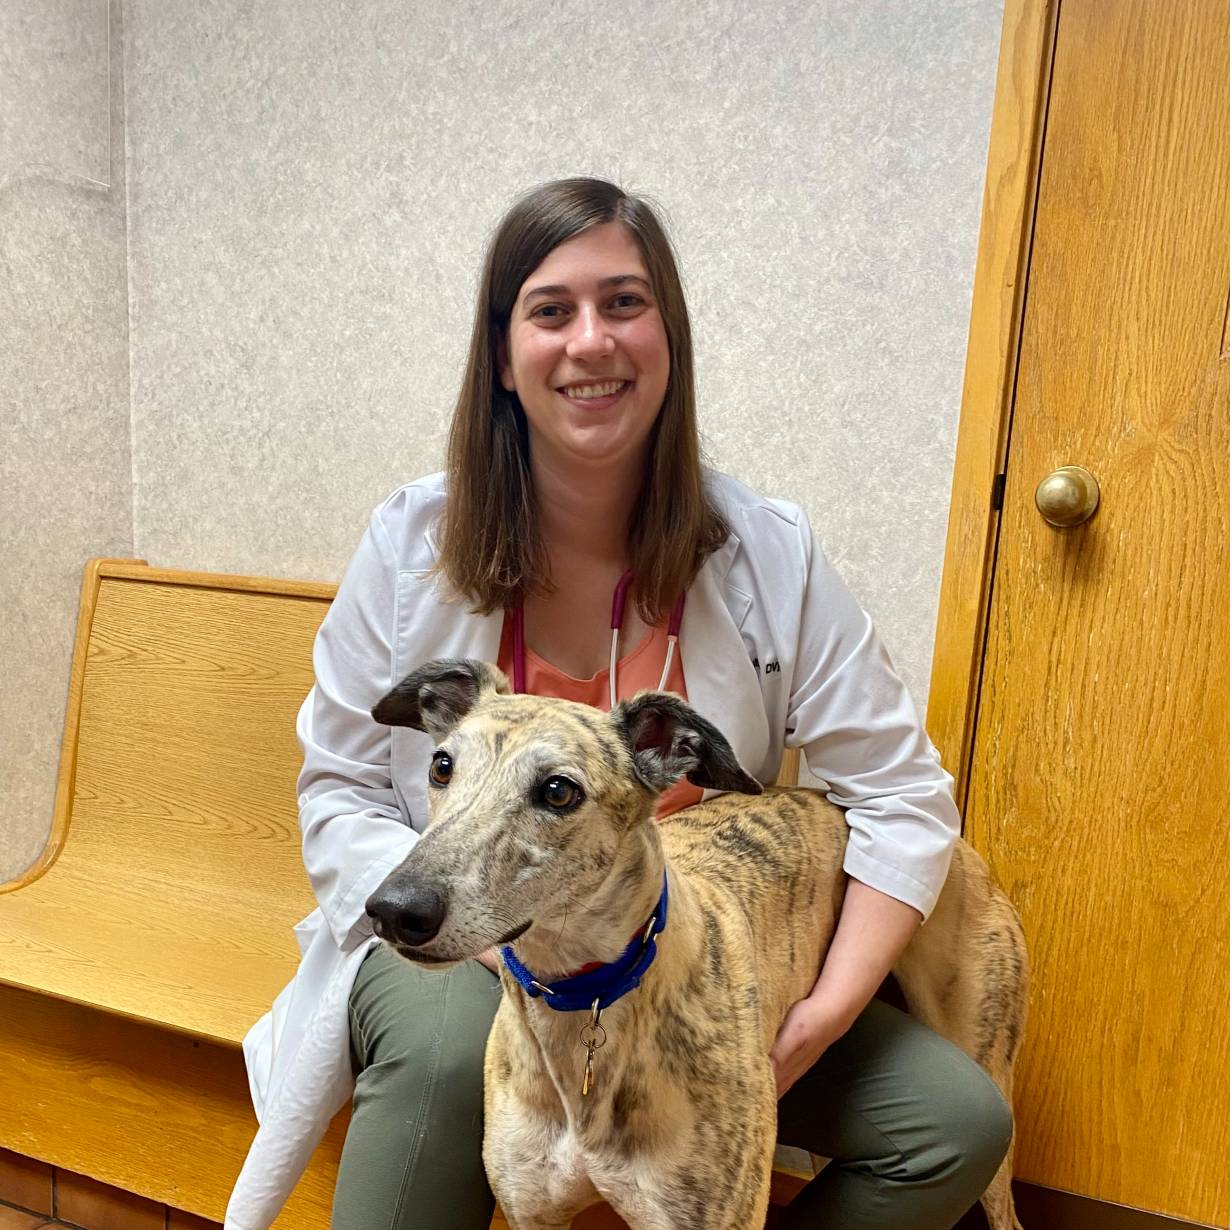 Dr. Fuller poses with Palmer the greyhound. Fireworks can be a source of stress and confusion for dogs like Palmer